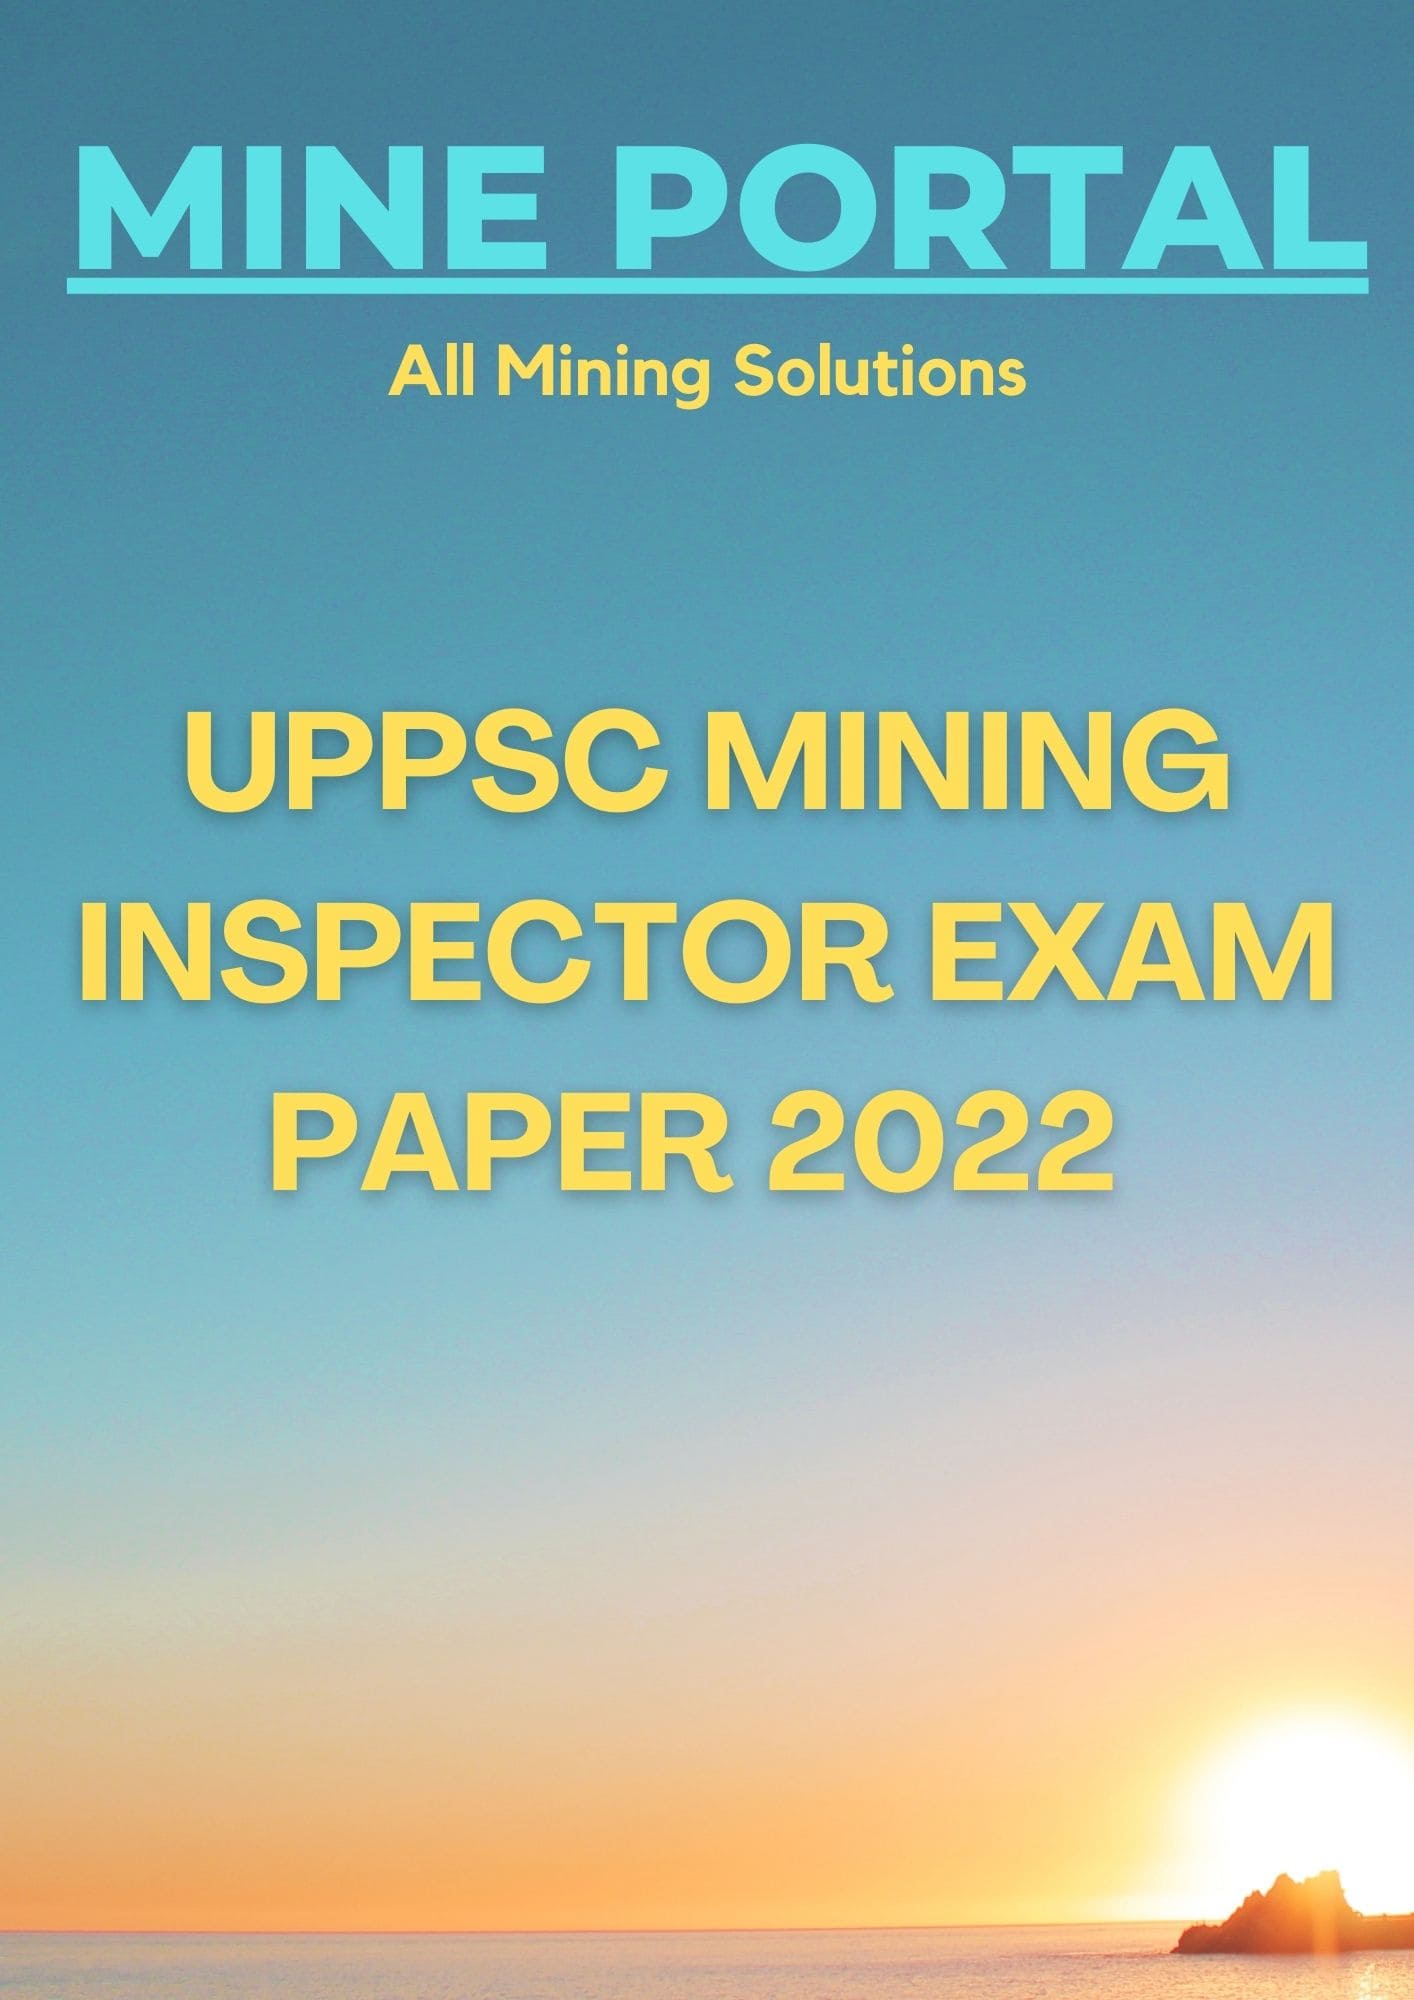 UPPSC MINING INSPECTOR PRELIMS EXAM 2022 PAPER WITH ANSWER KEY